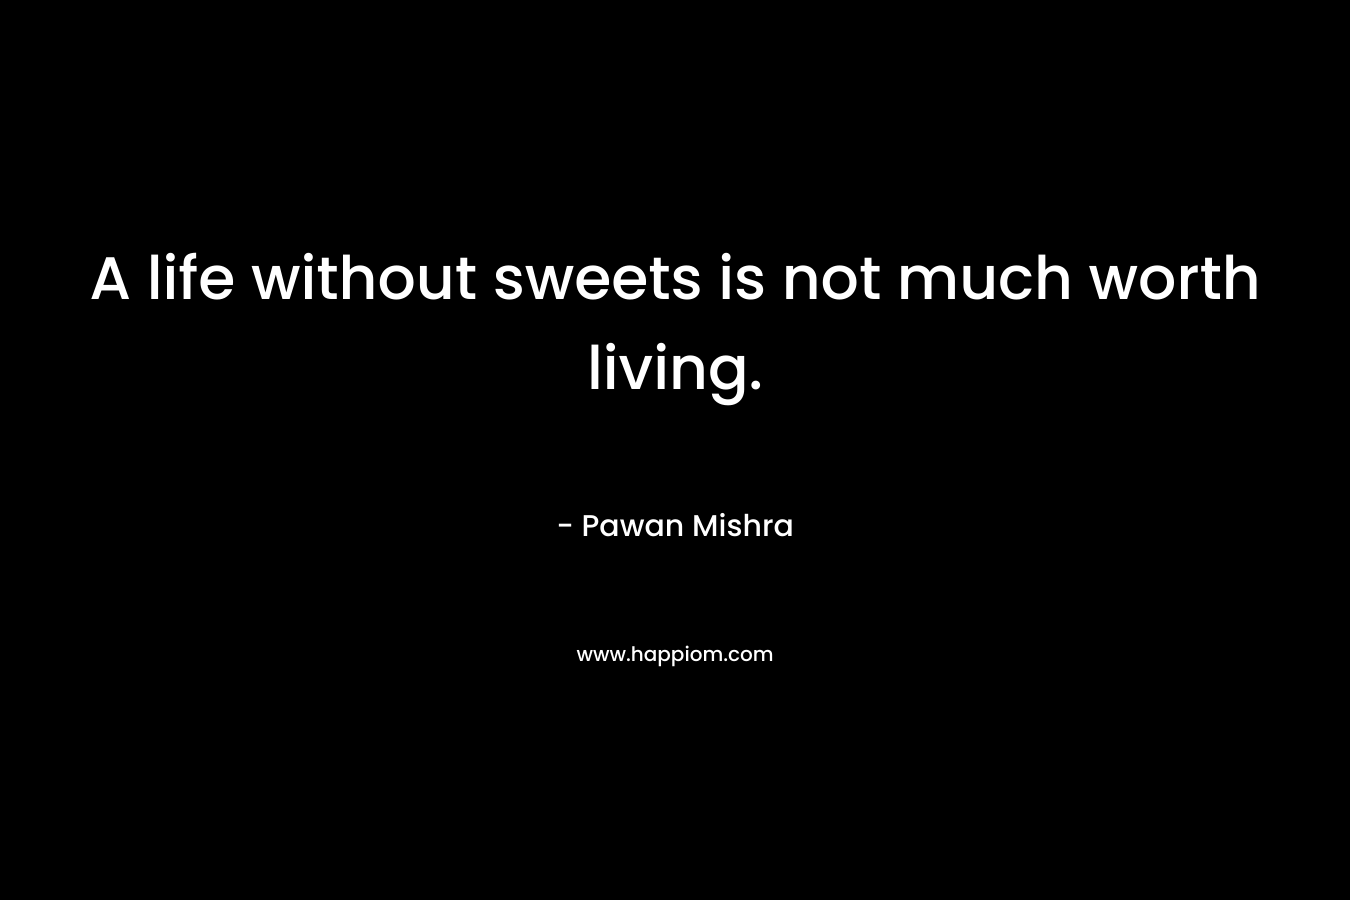 A life without sweets is not much worth living.